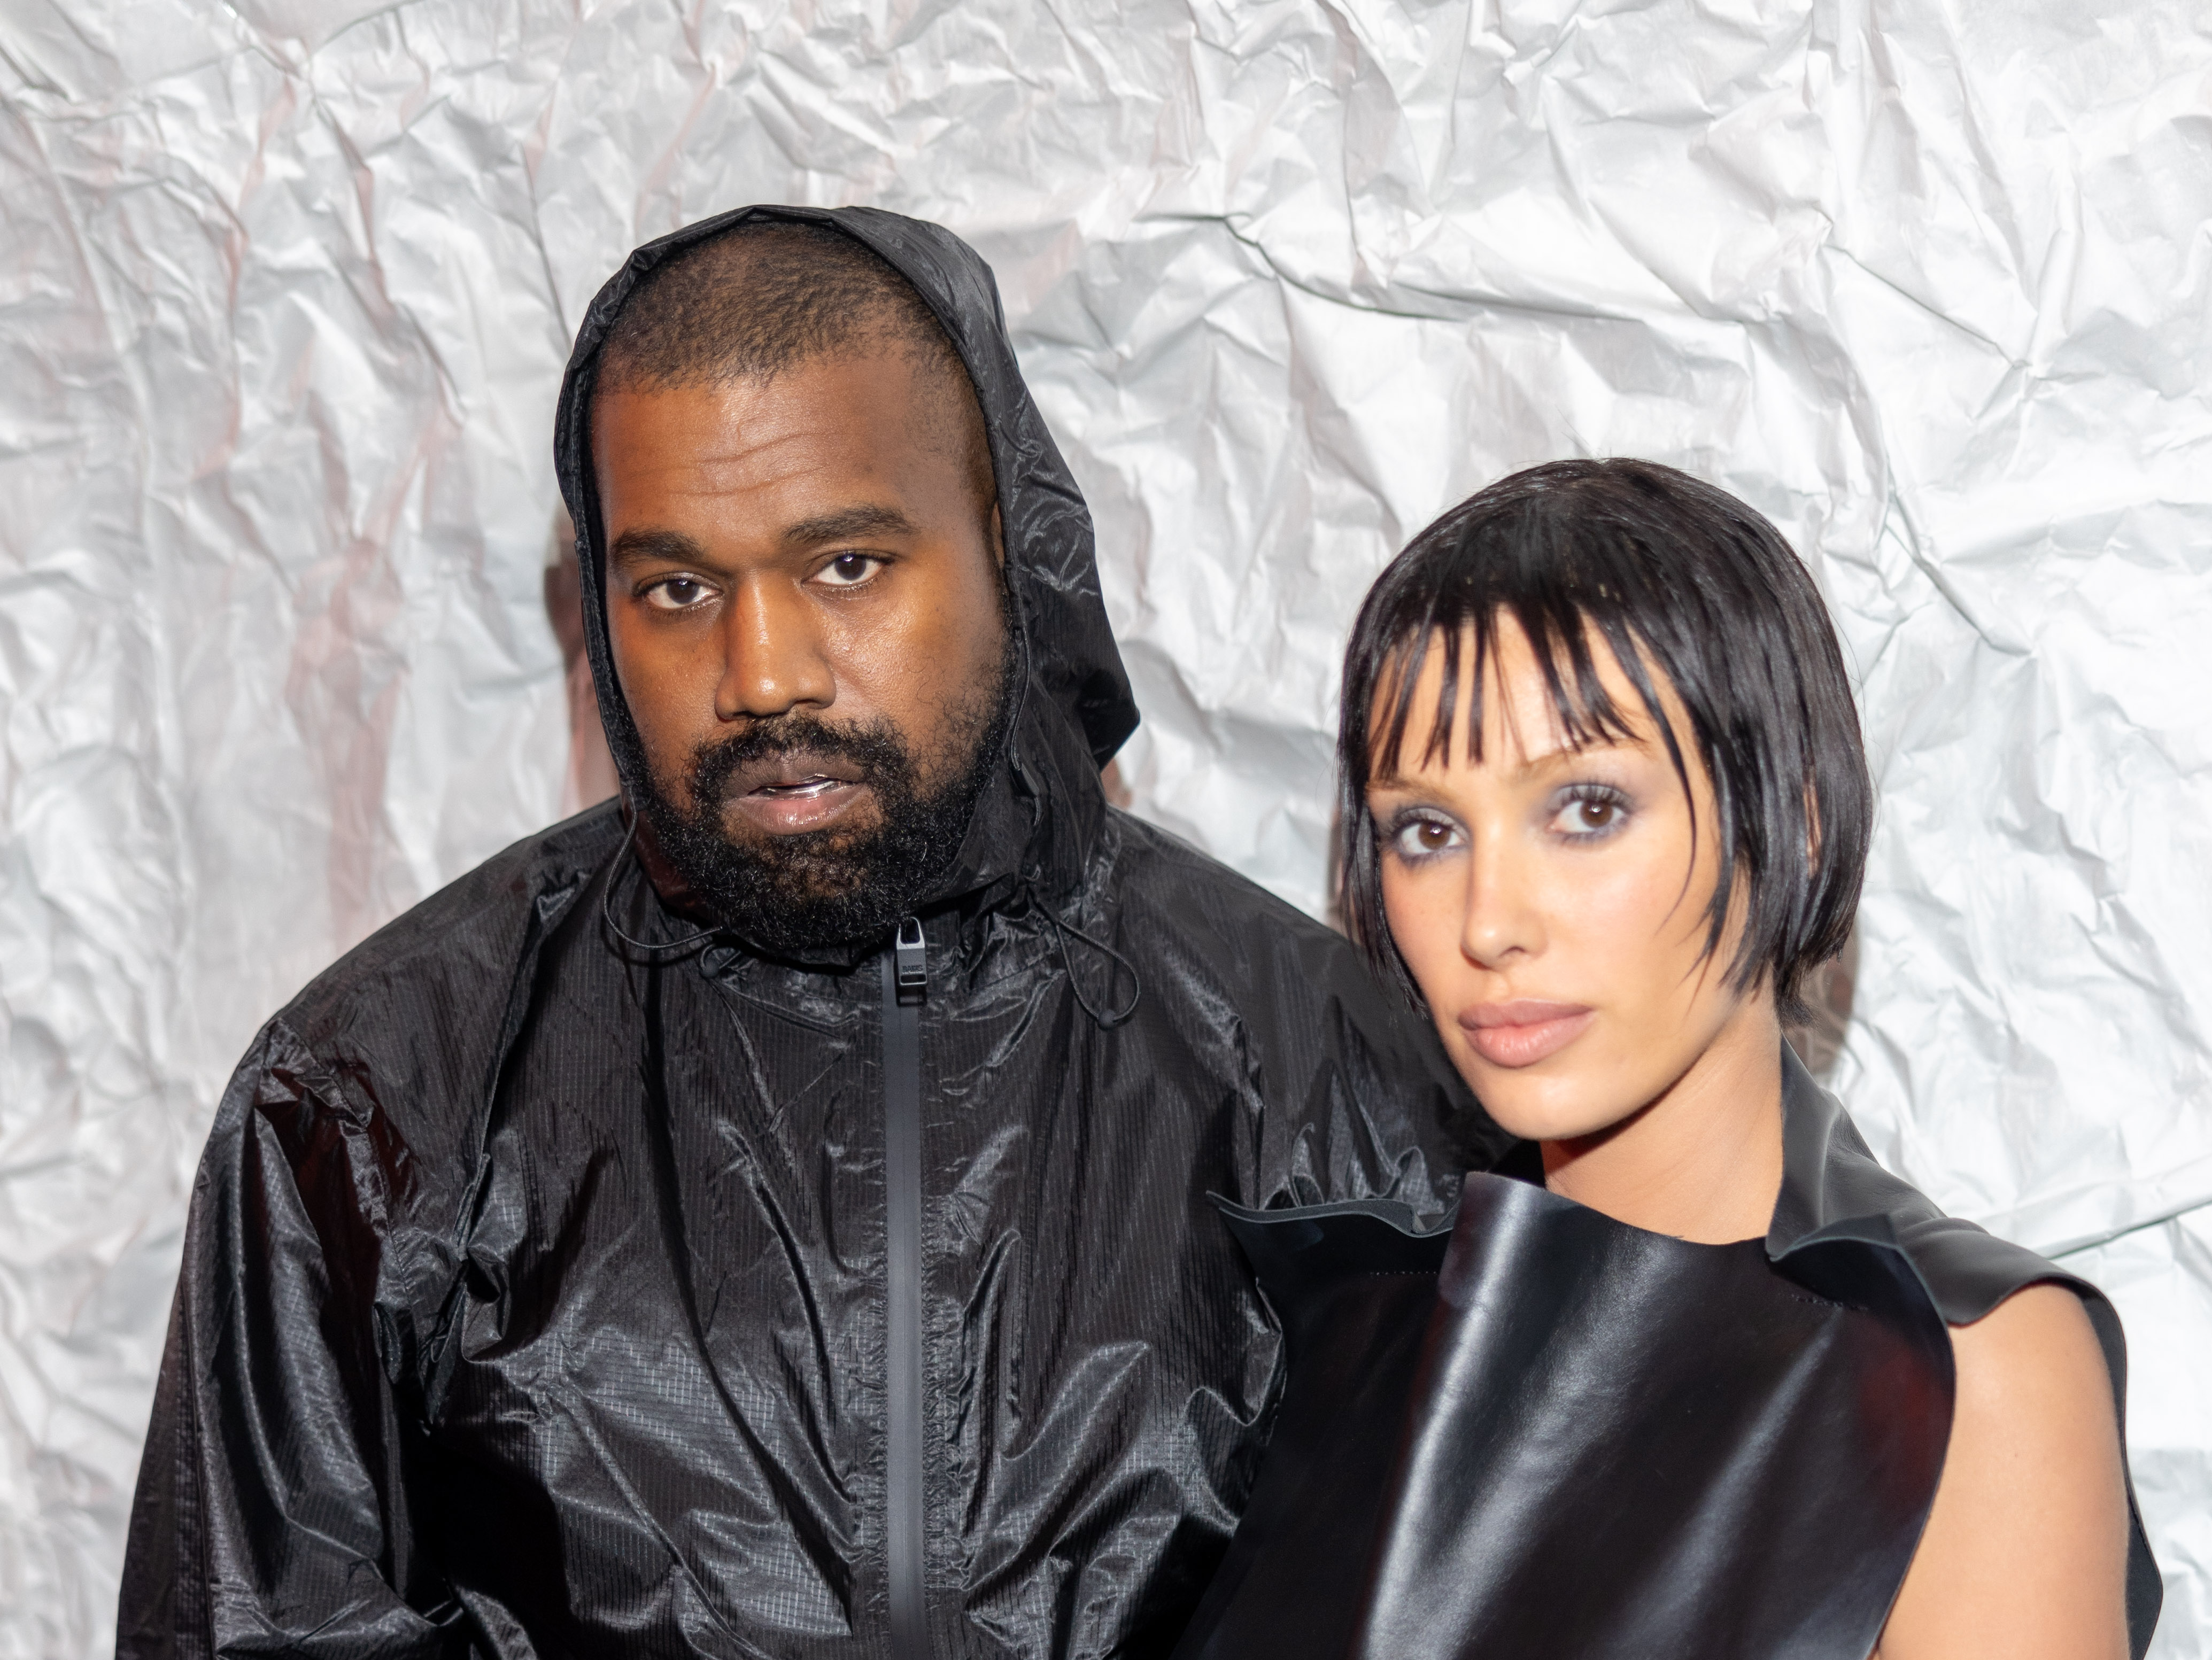 Kanye West's wife Bianca Censori goes completely underwear free